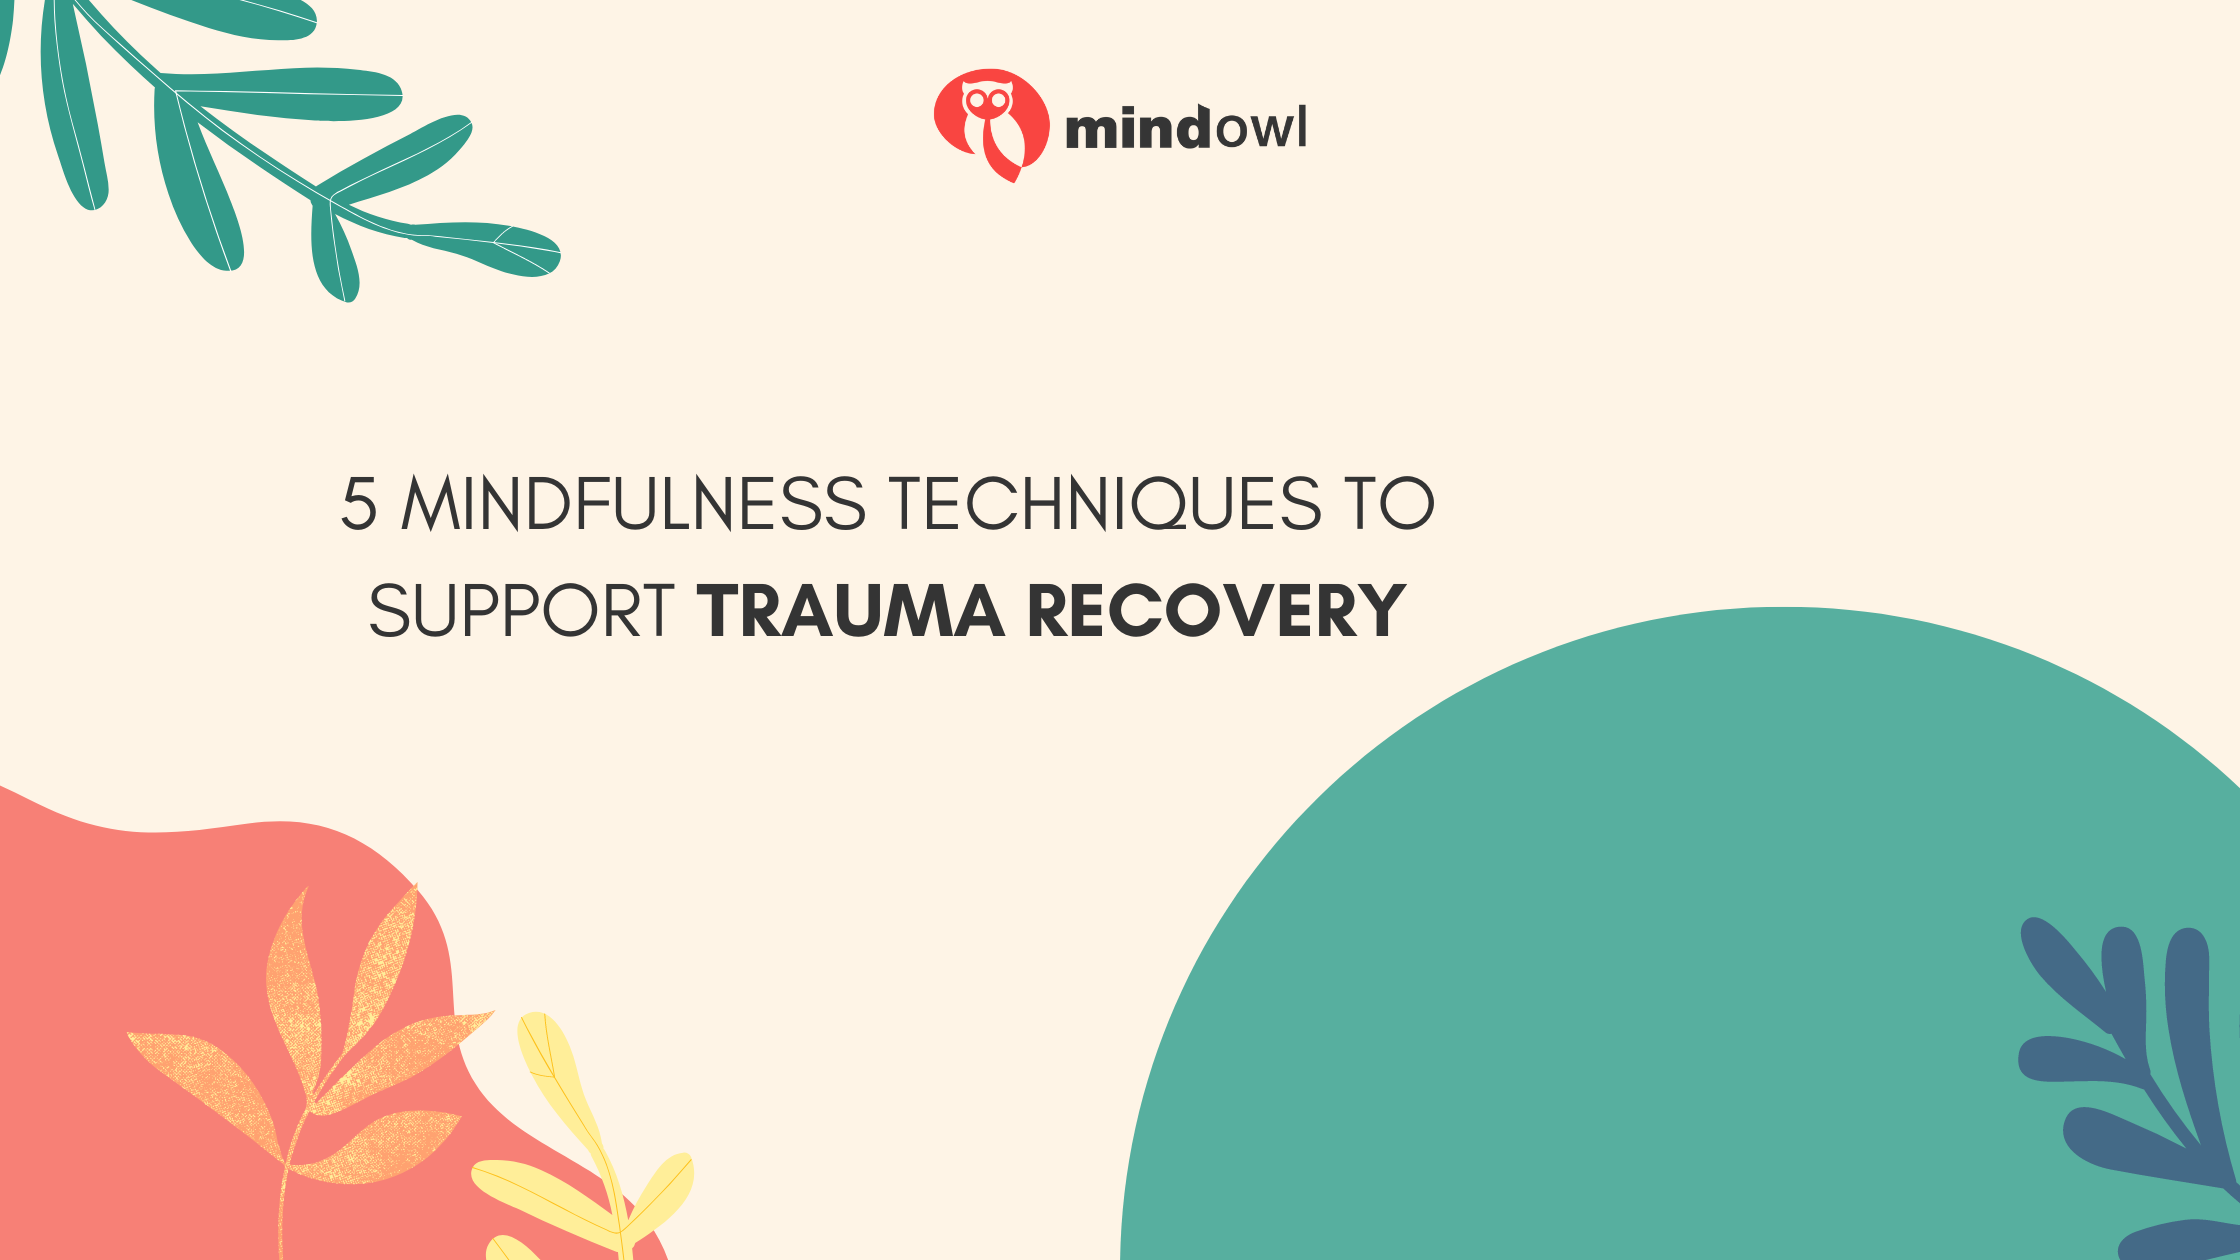 5 Mindfulness Techniques to Support Trauma Recovery